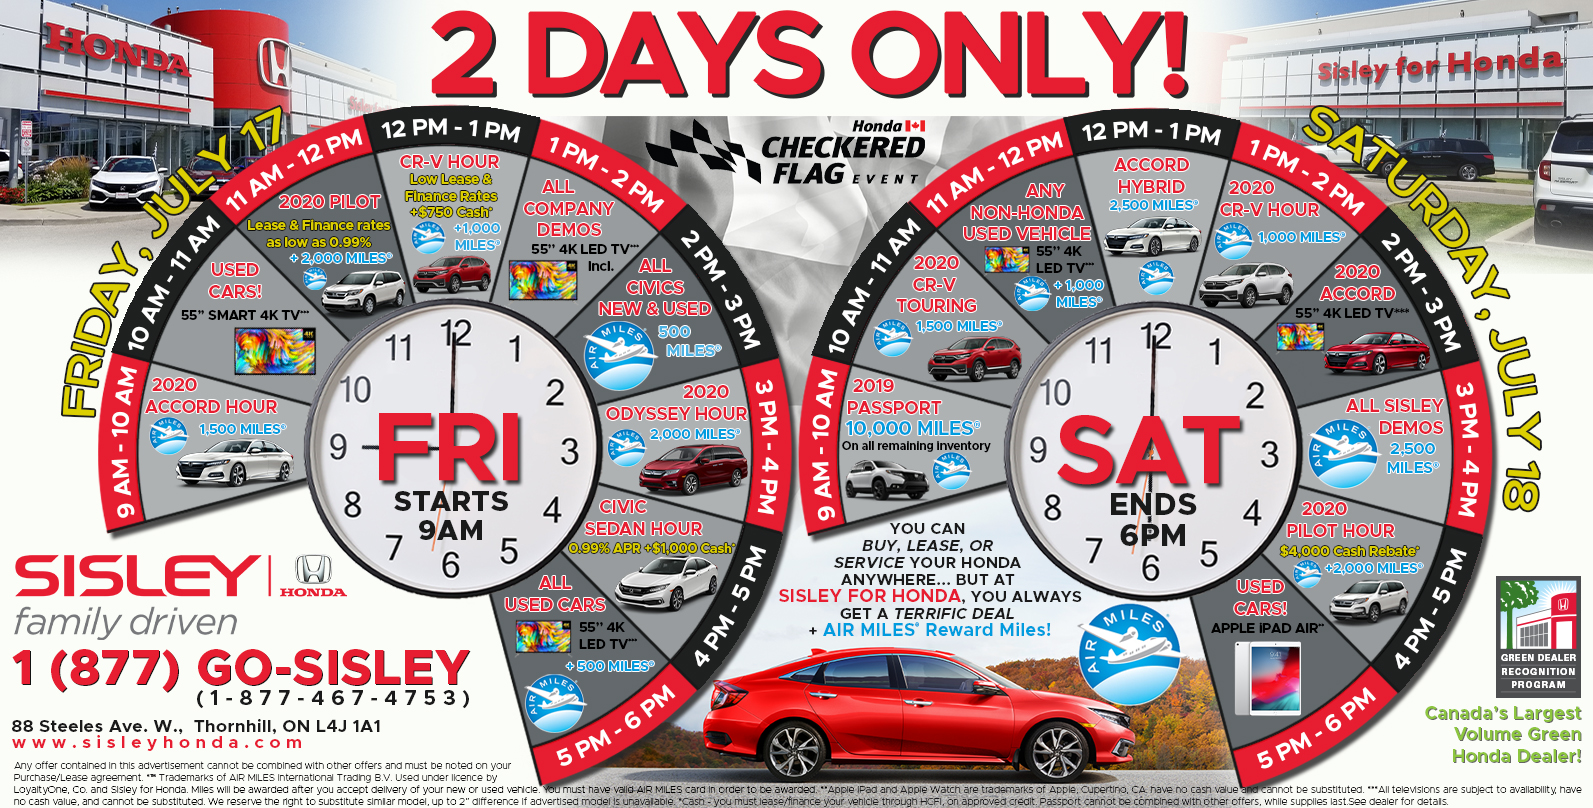 Checkered Flag Event 2 Day Sale!